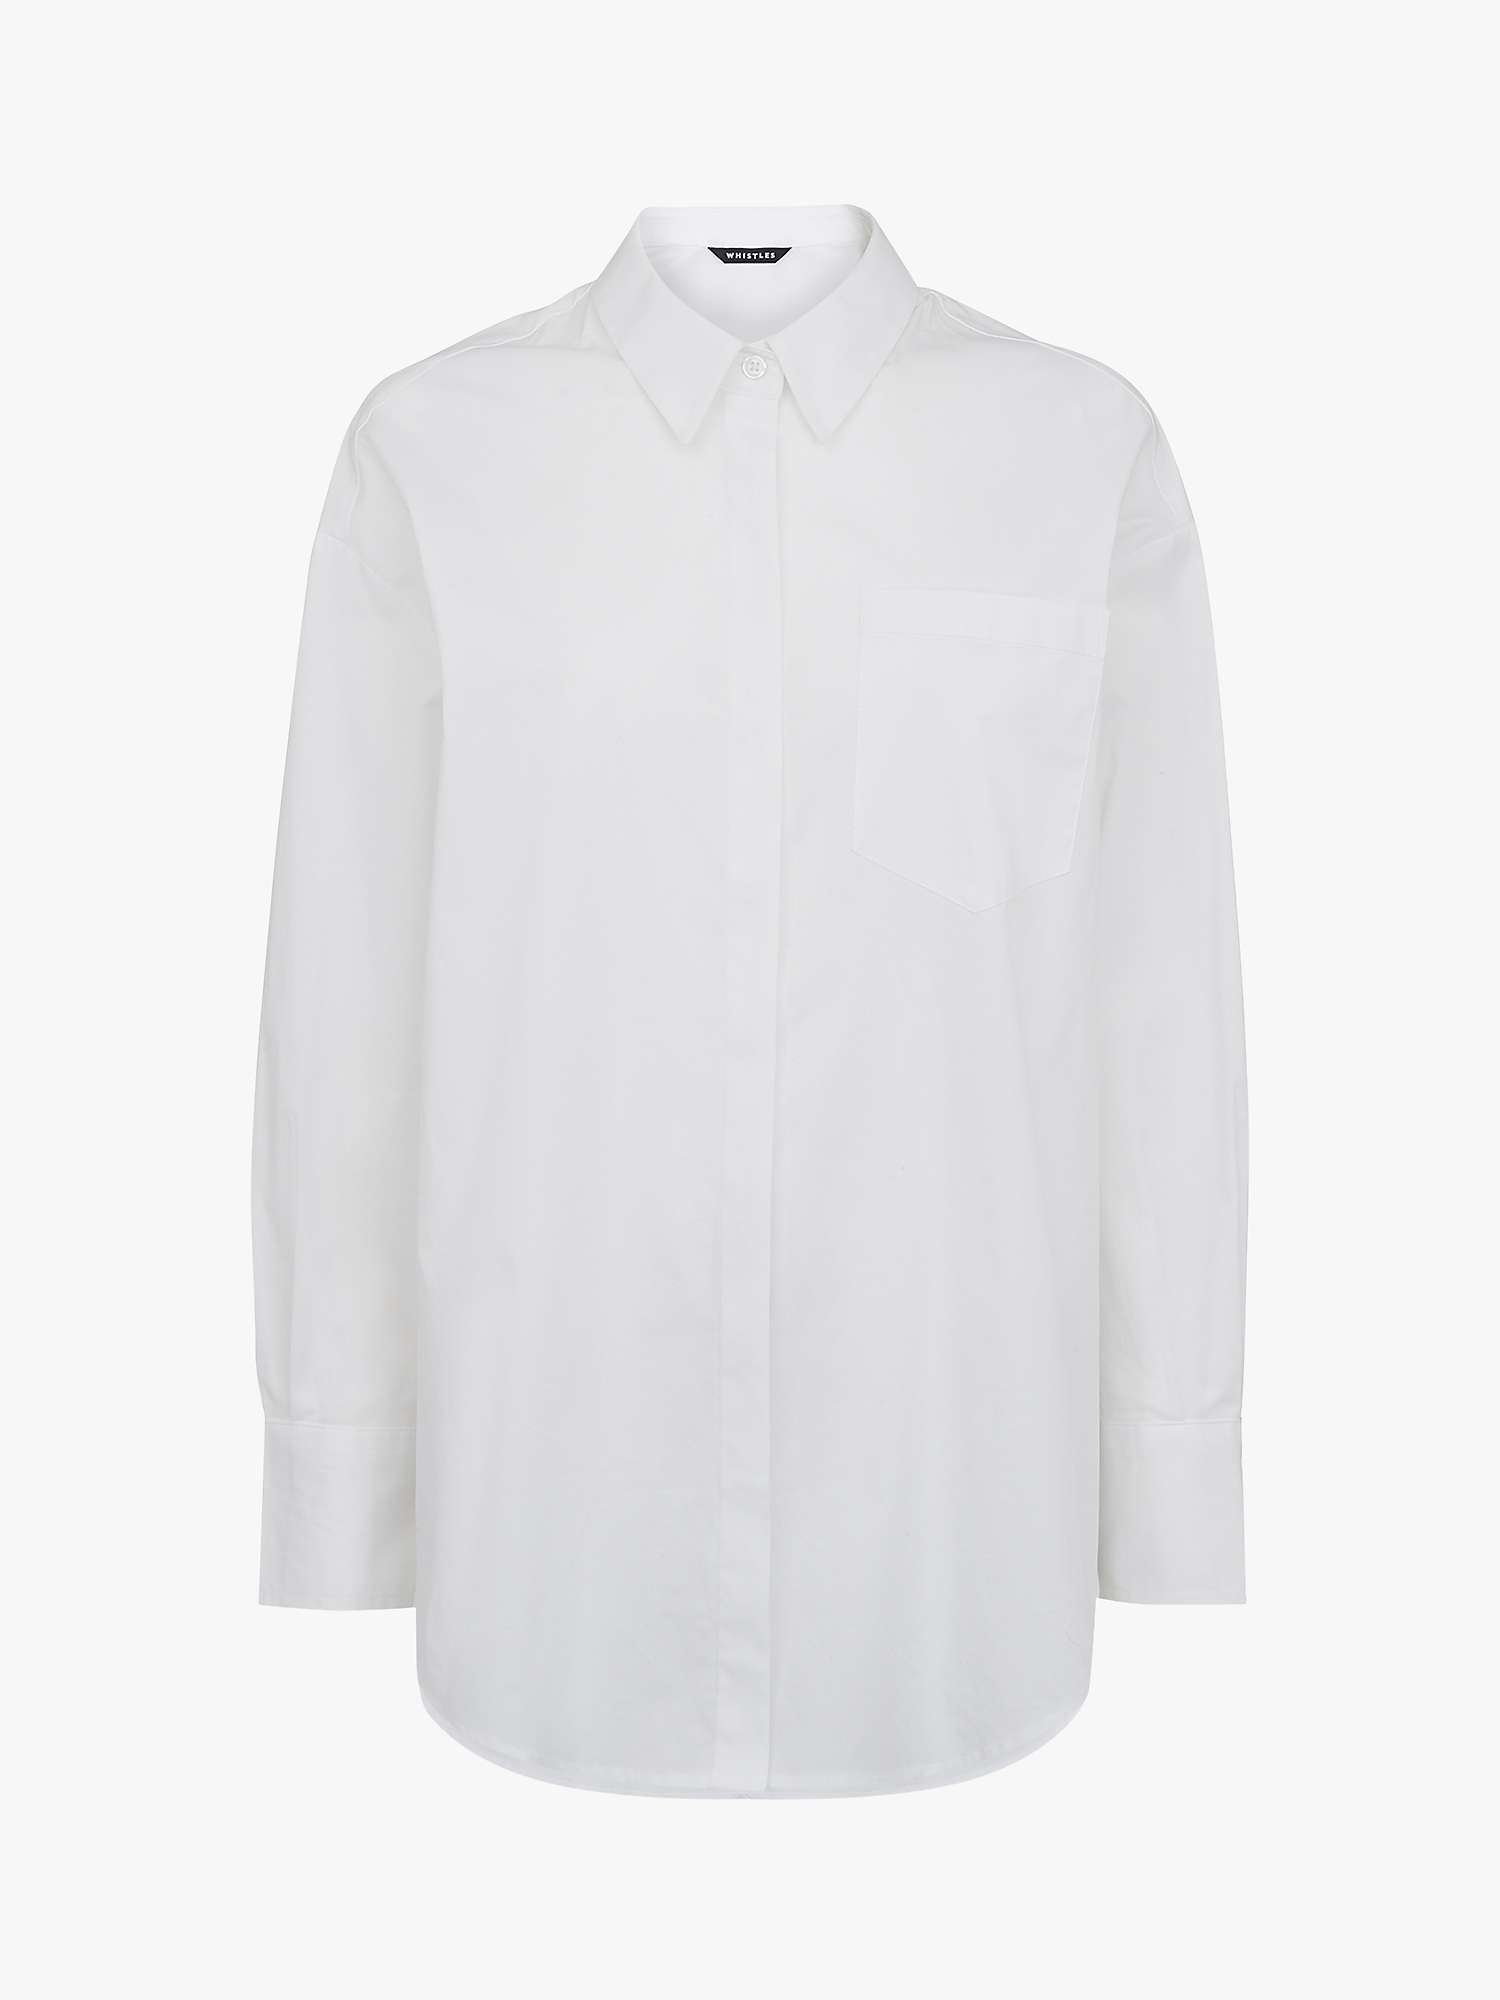 Buy Whistles Oversized Cotton Shirt Online at johnlewis.com